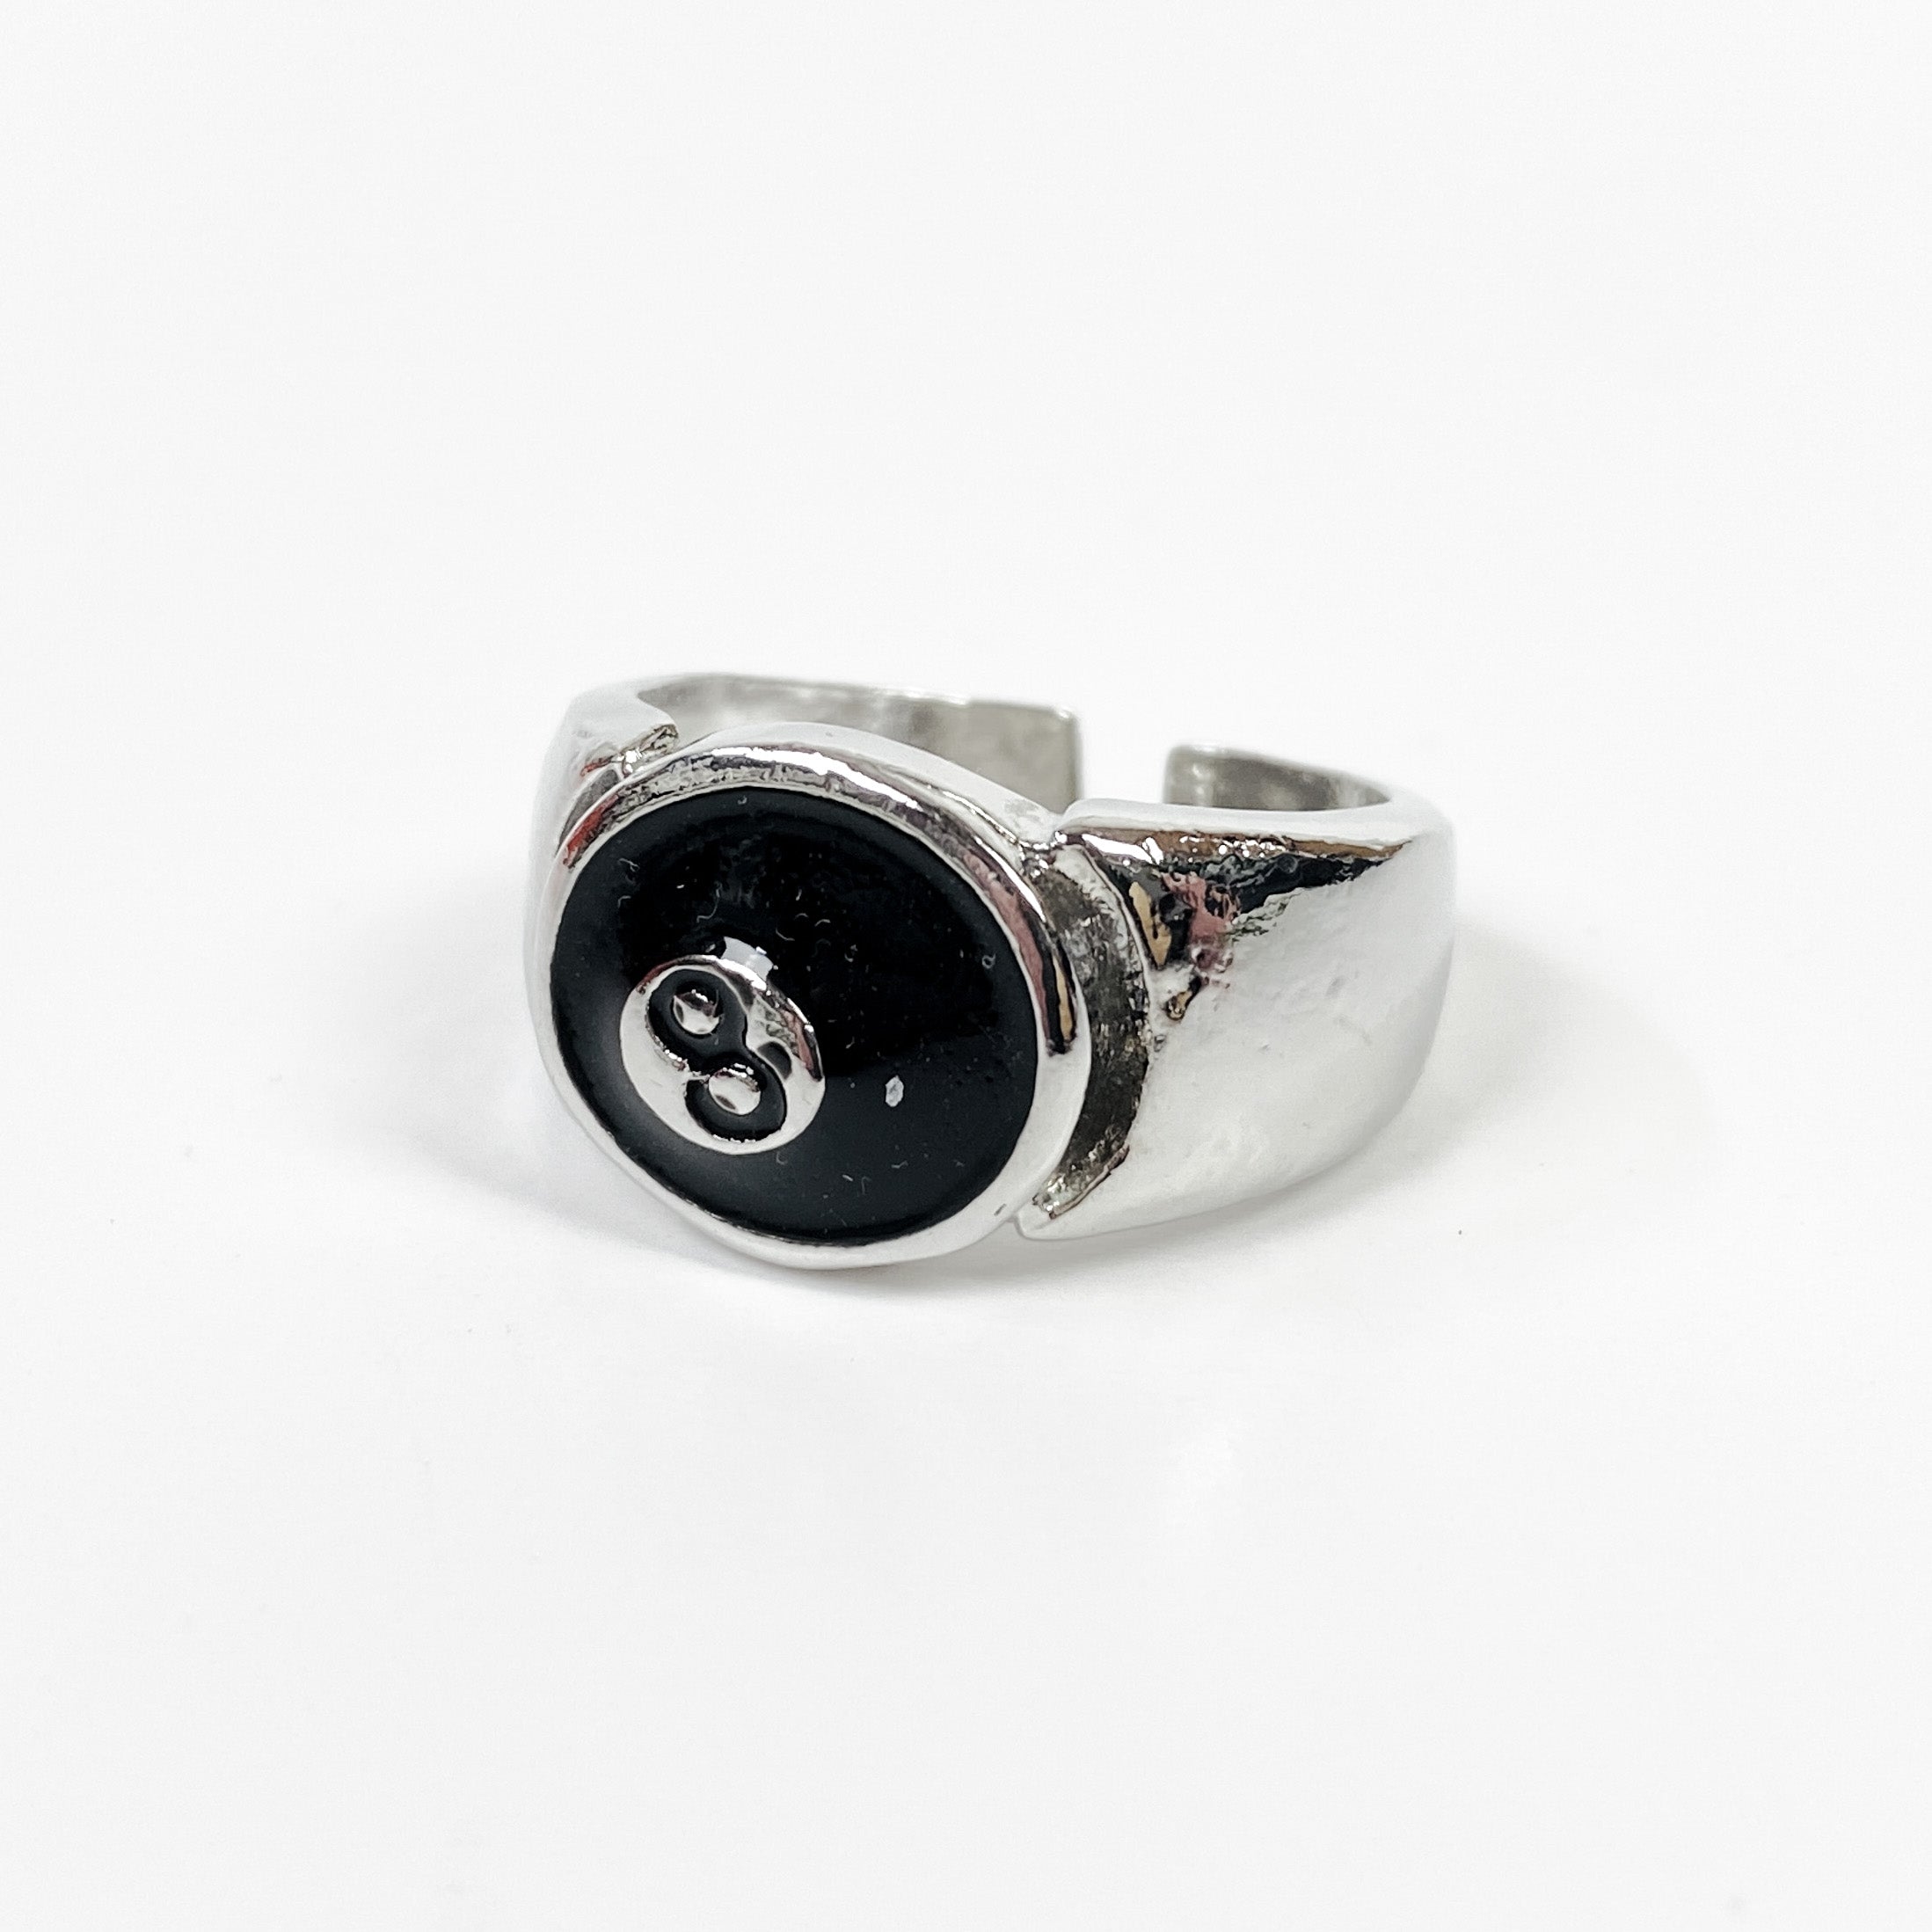 Vintage Retro Adjustable 8 Ball Ring Silver – Clout Closet